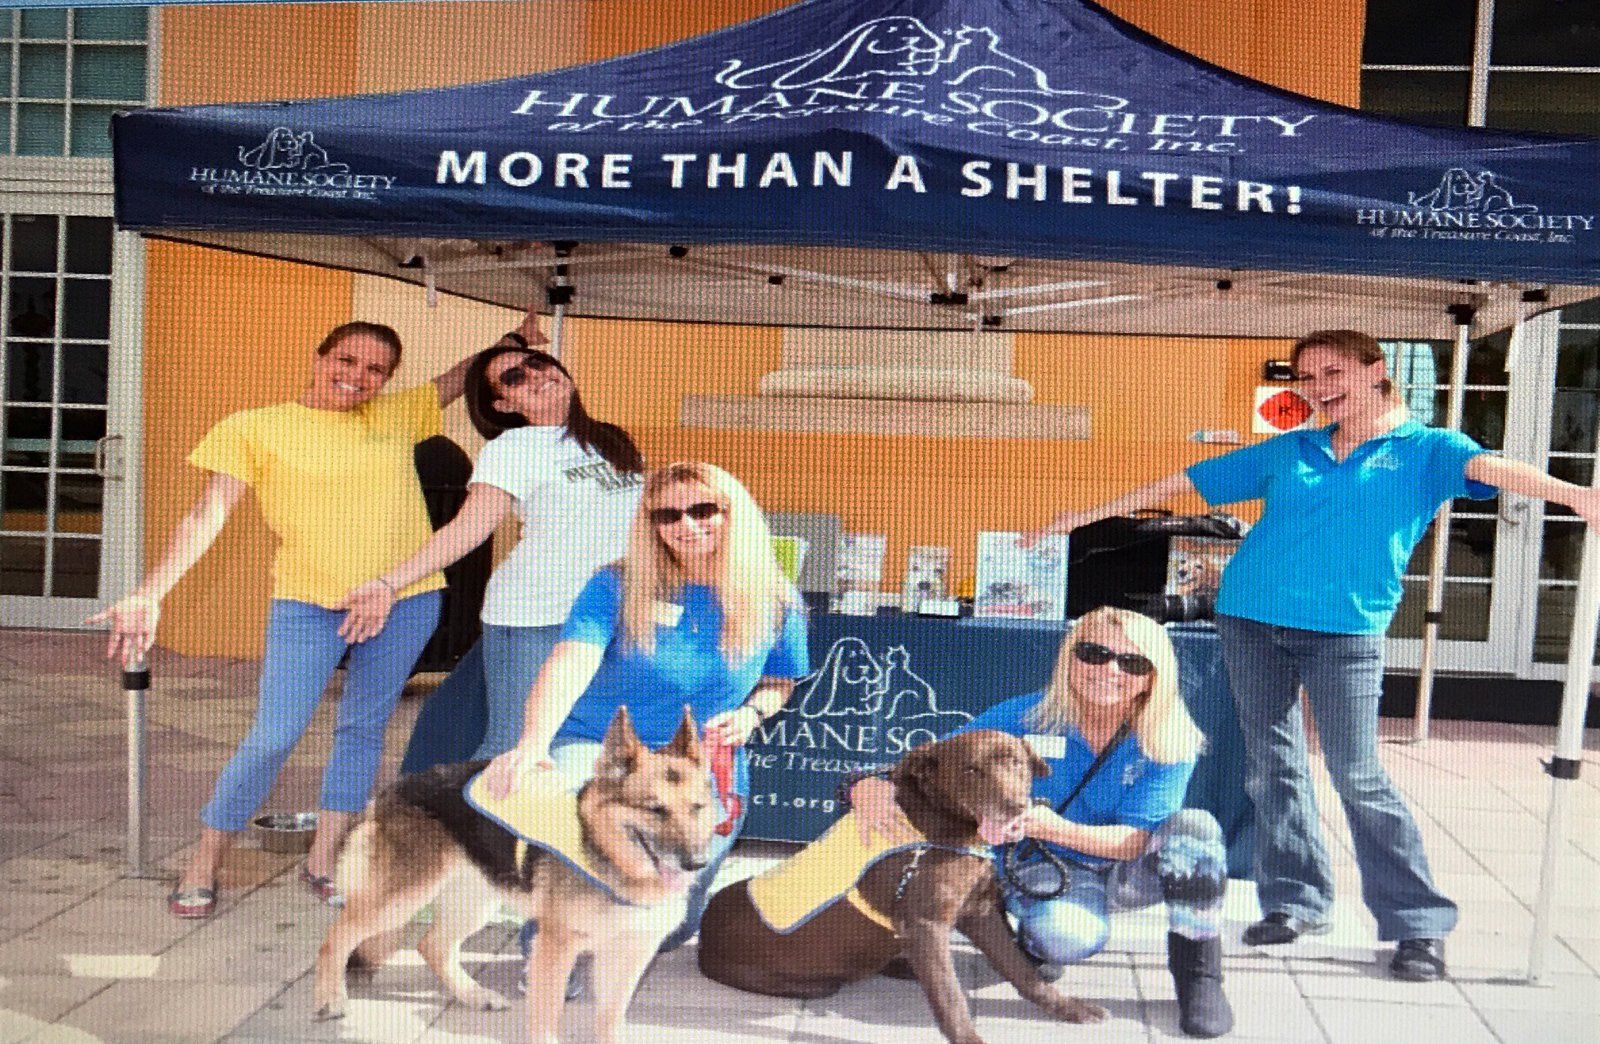 Martin County Animal Shelter participated and the friendly canines like helping kids